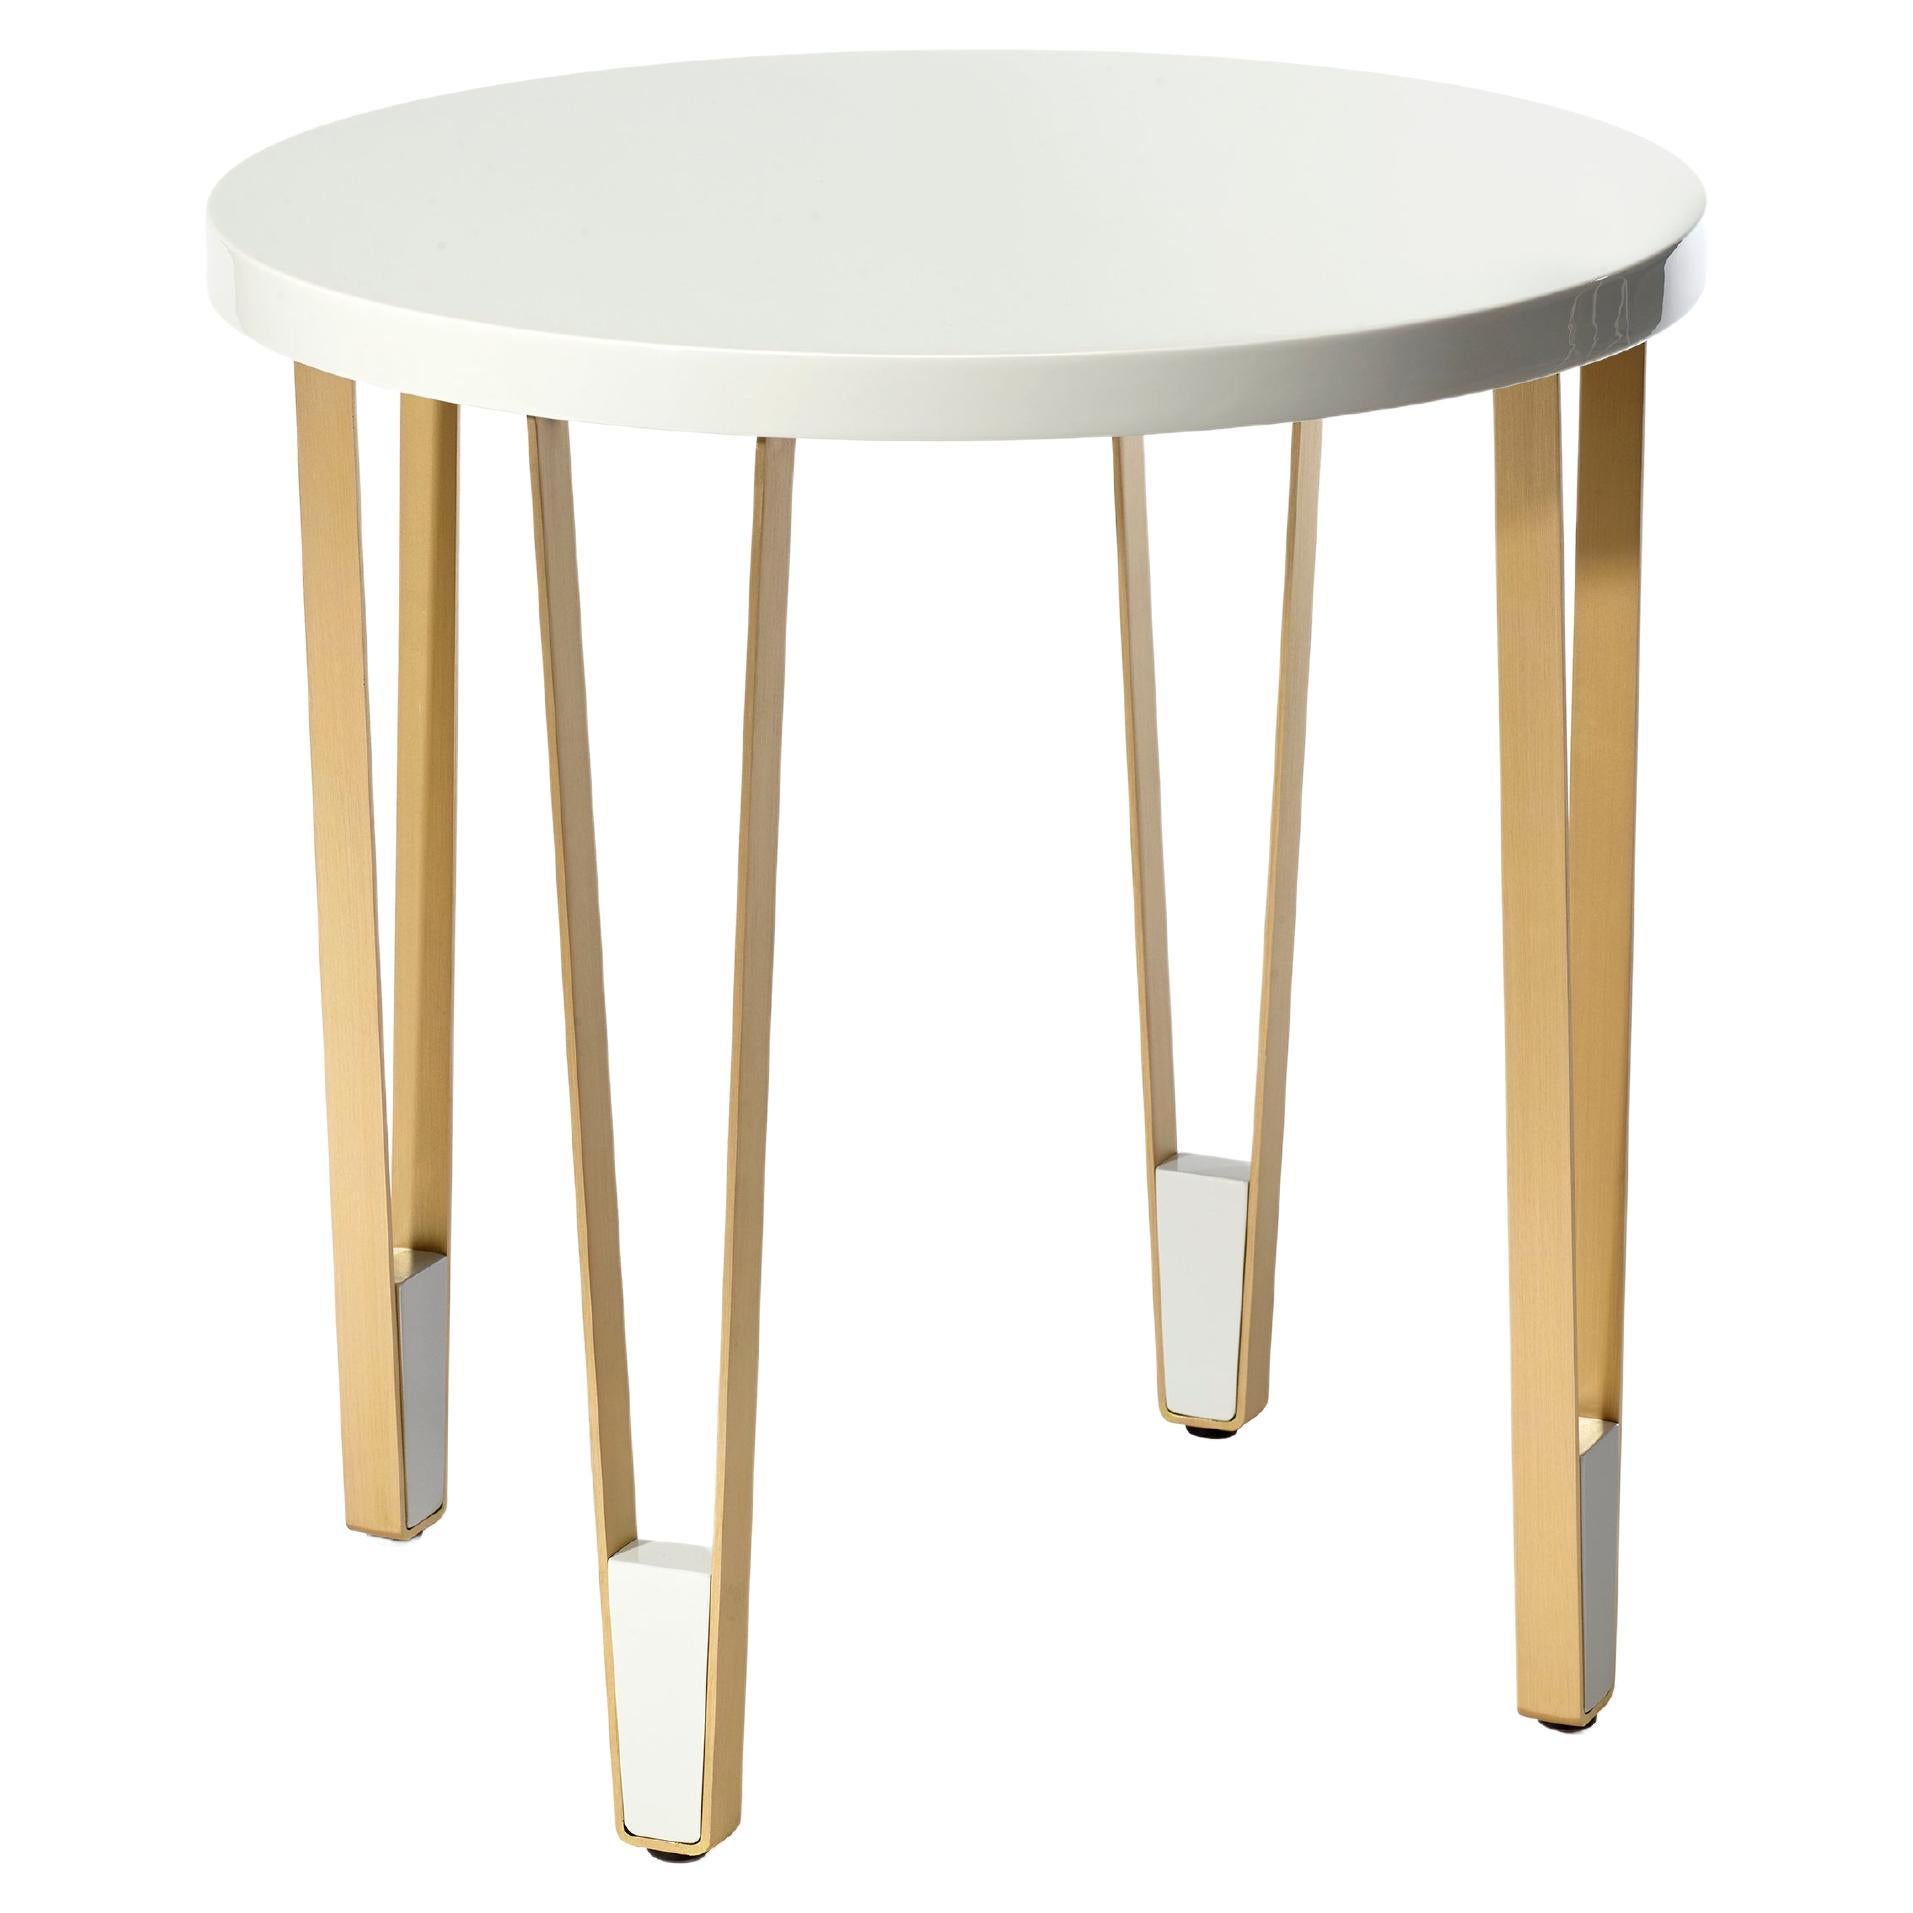 Table d'appoint ronde Ionic d'InsidherLand